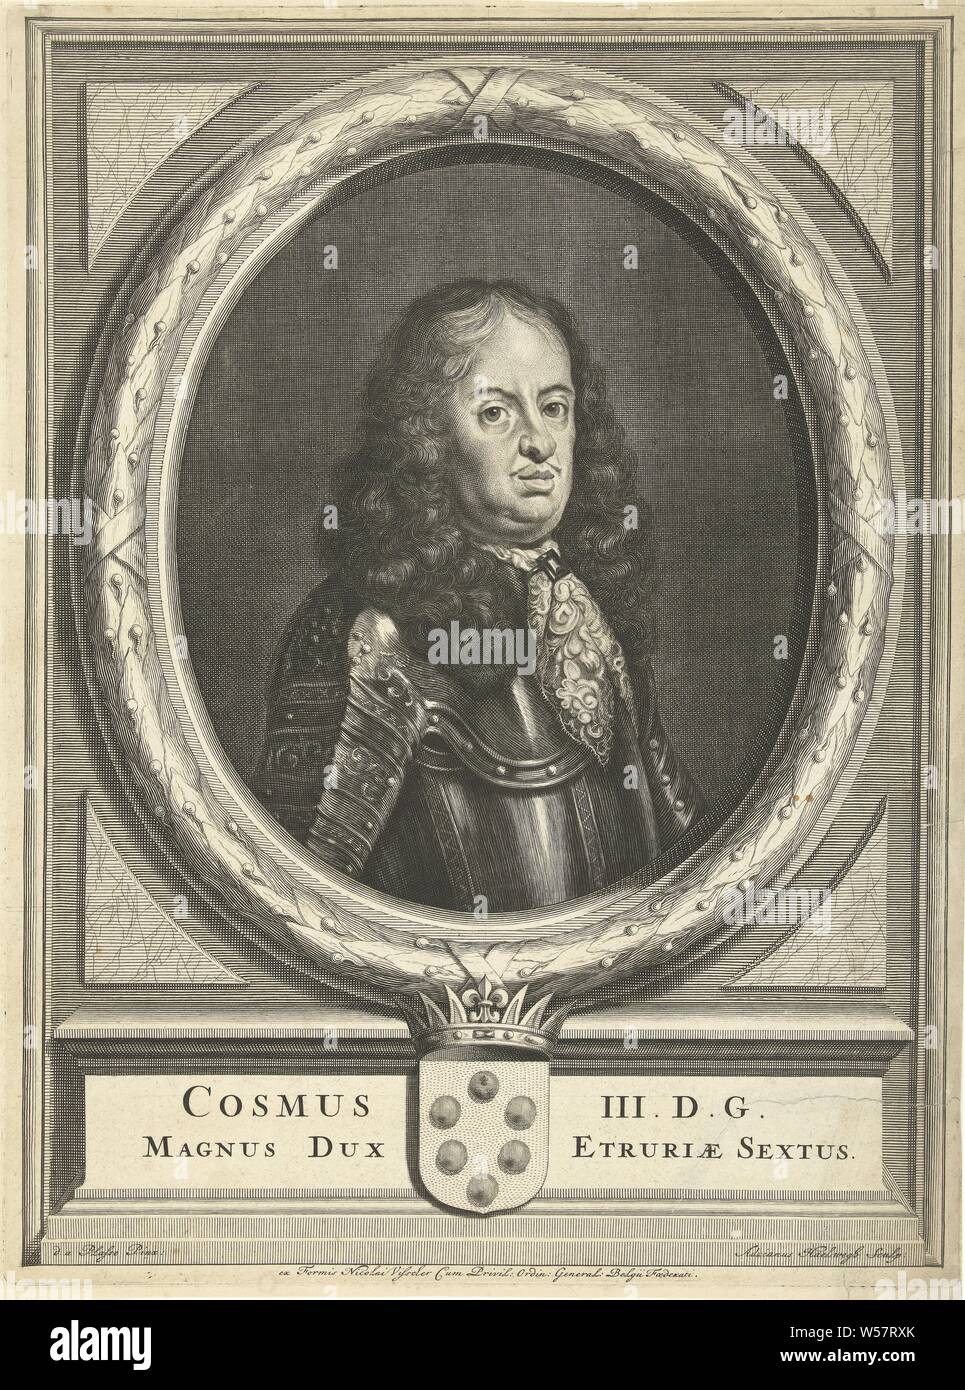 Portrait of Cosimo III de Medici, Half-length portrait to the right of Cosimo III de Medici, Grand Duke of Tuscany, wearing an armor, surrounded in an oval with a laurel wreath. At the bottom are his coat of arms with a crown and his name and title, lace, military clothing and other equipment (uniforms, cap, armor, helmet, etc.), Cosimo III de'Medici, Adriaen Haelwegh (mentioned on object), in or after 1670 - 1677, paper, engraving, h 355 mm × w 283 mm Stock Photo